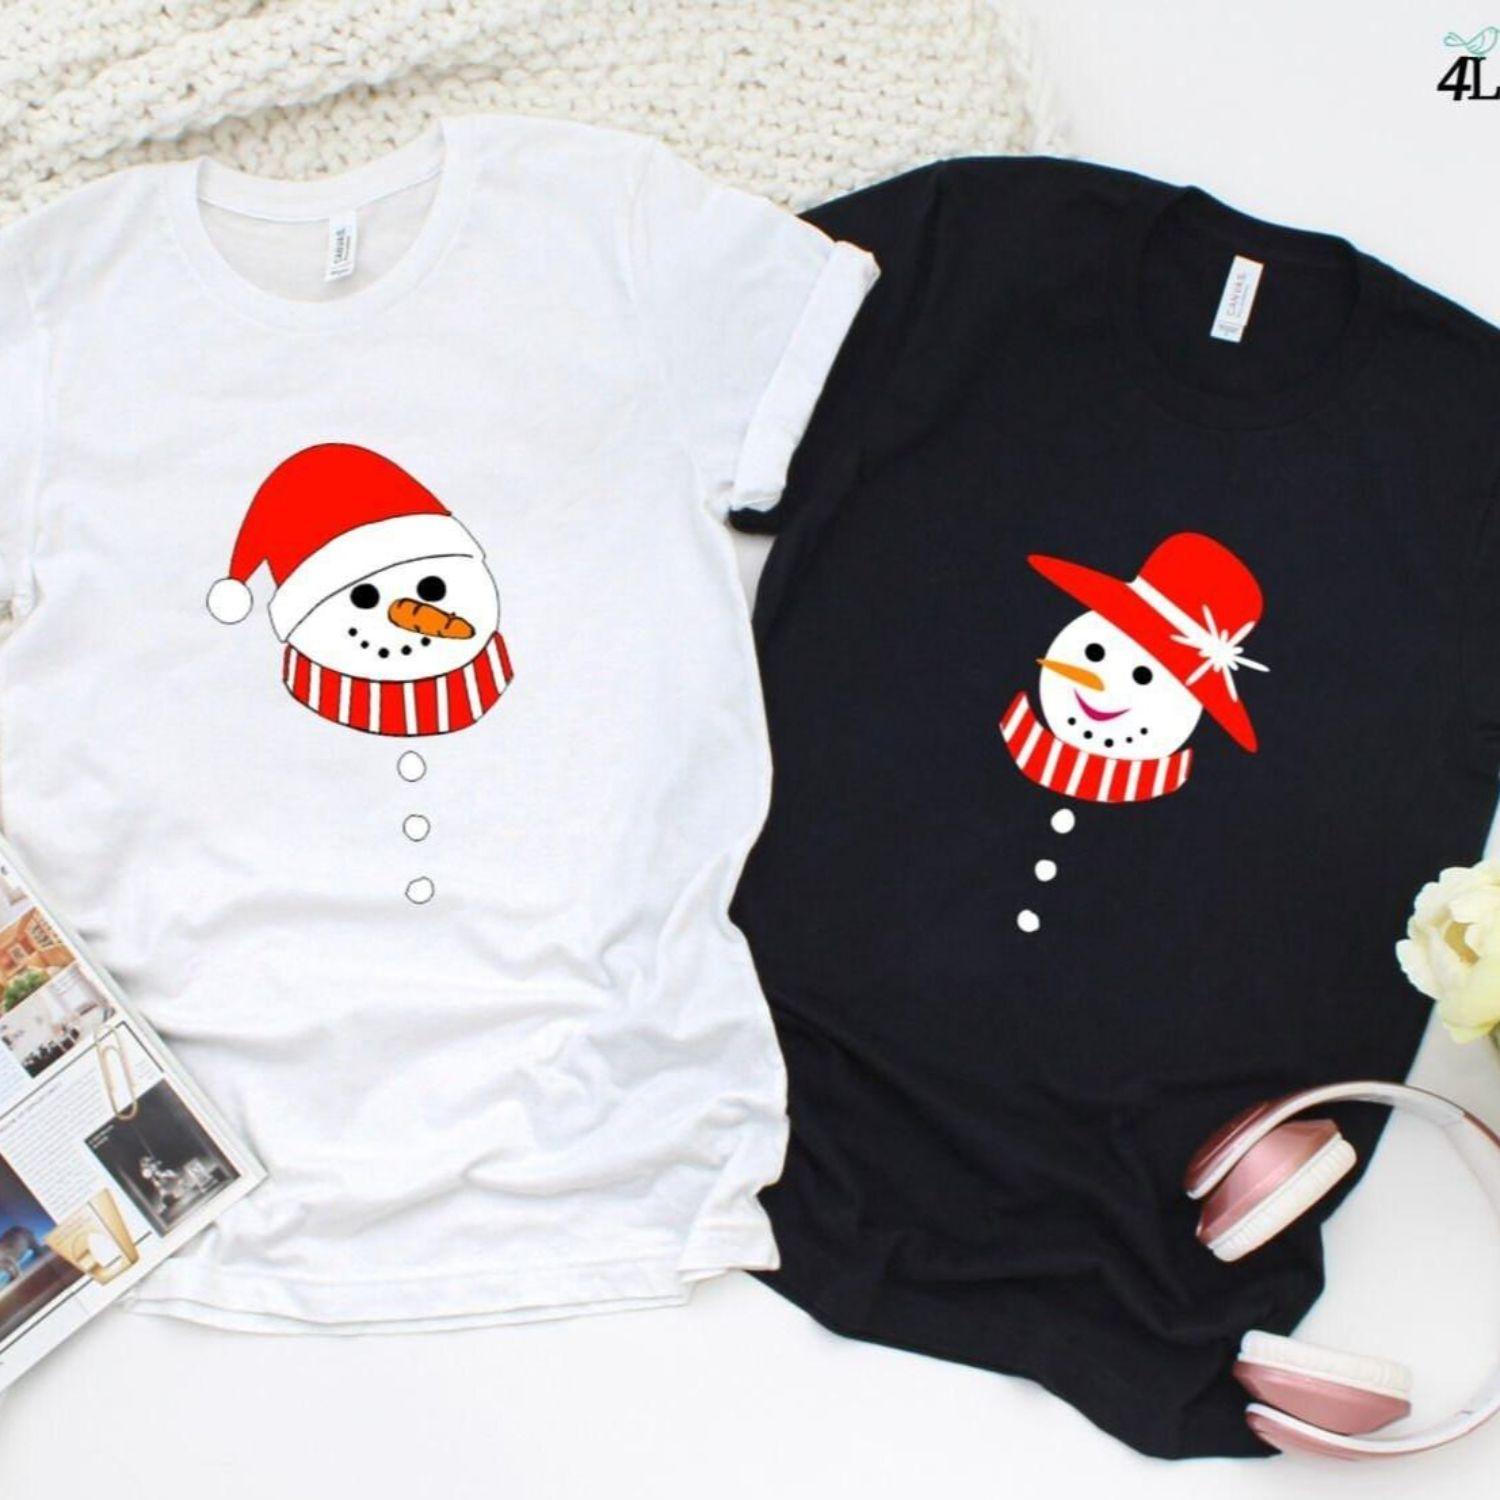 Snowman Couple Matching Set - His and Hers Christmas Outfit - 4Lovebirds